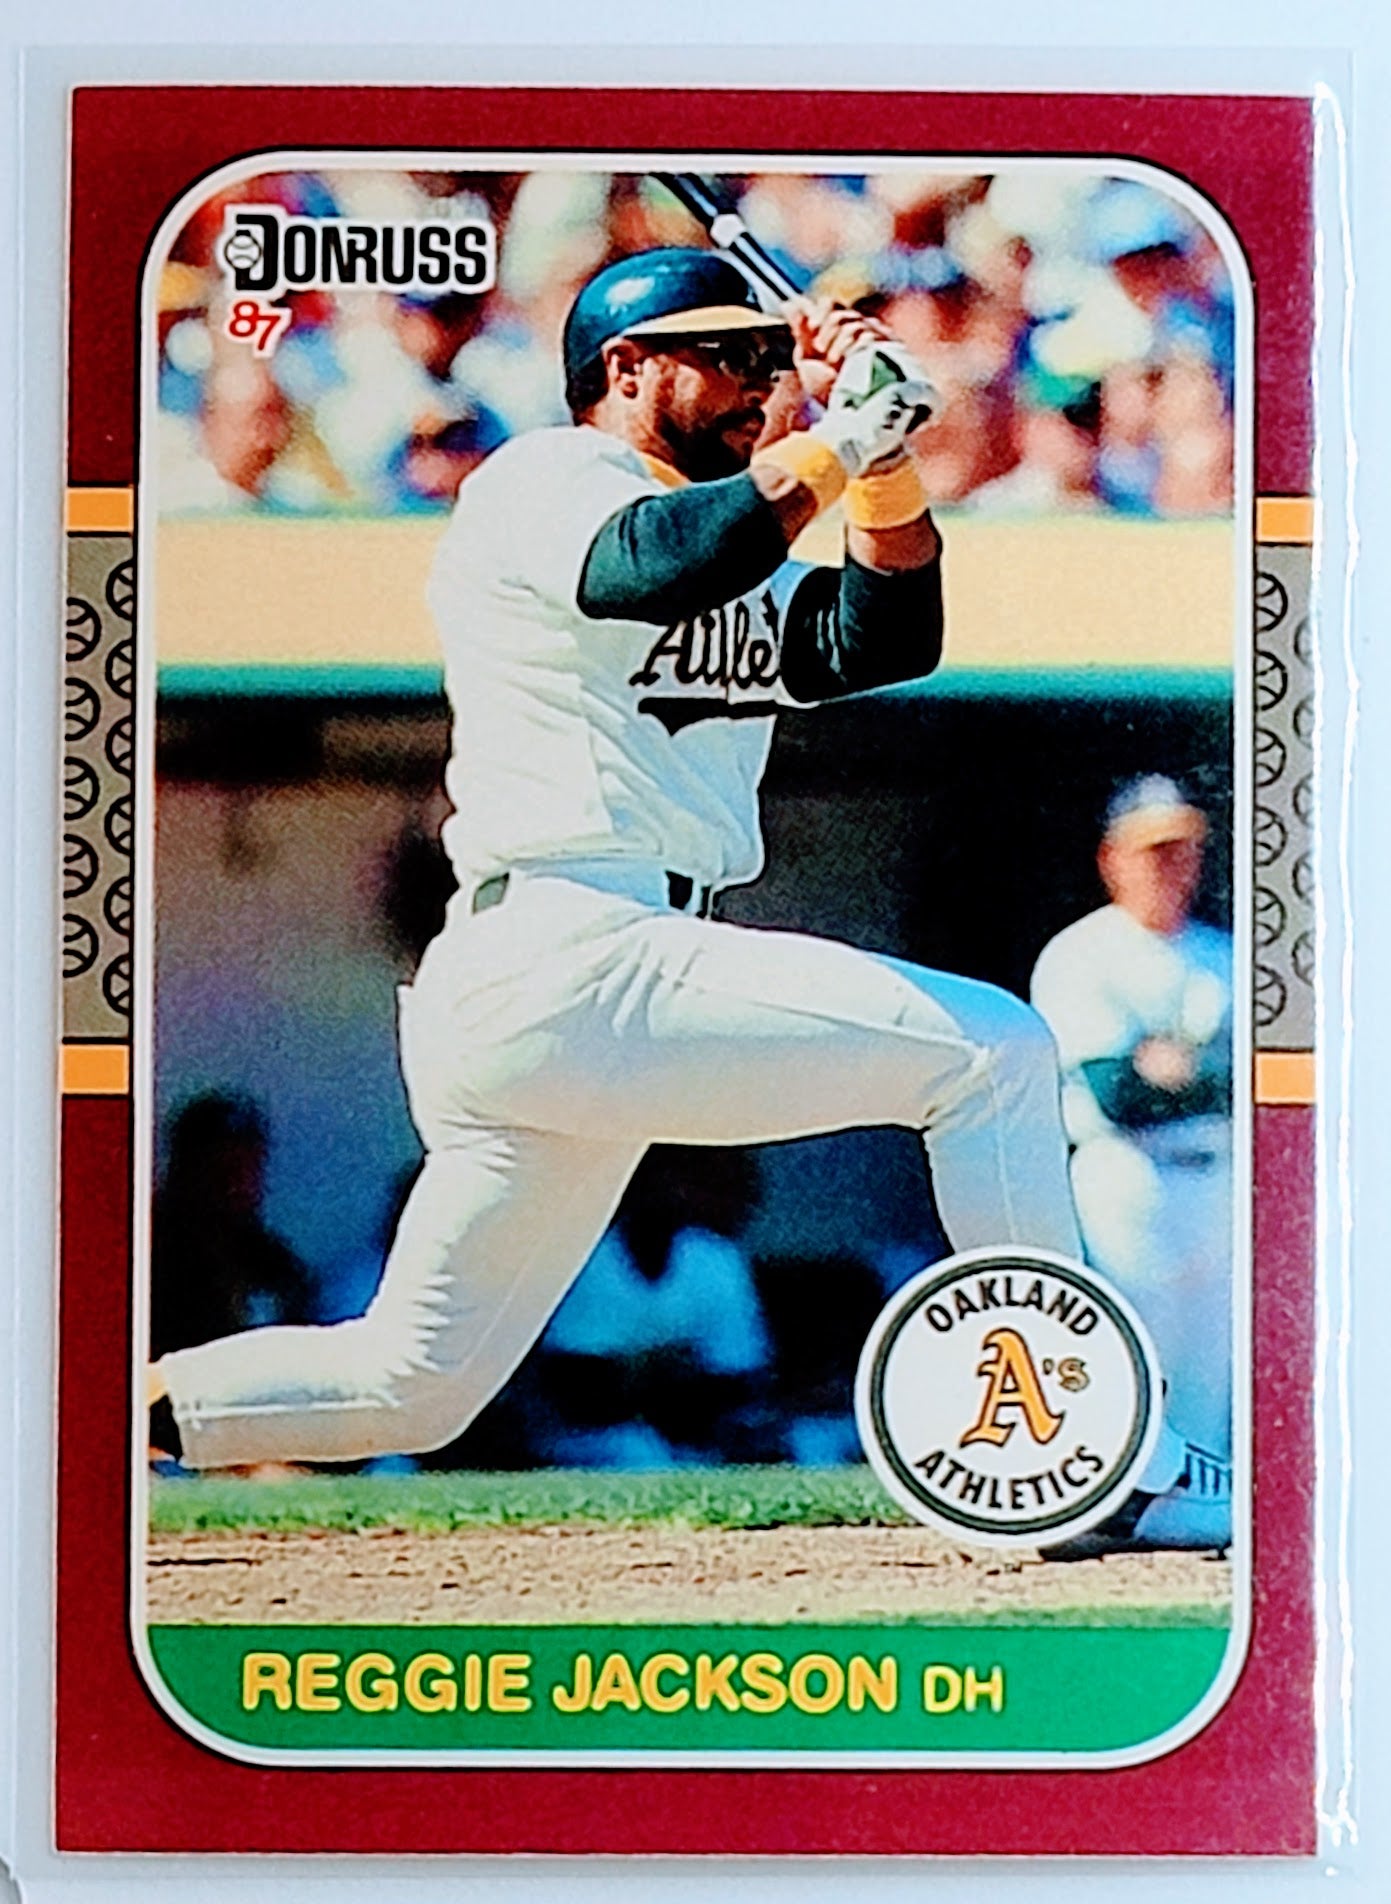 1987 Donruss Opening Day
  Reggie Jackson   Oakland Athletics
  Baseball Card TH1C4 simple Xclusive Collectibles   